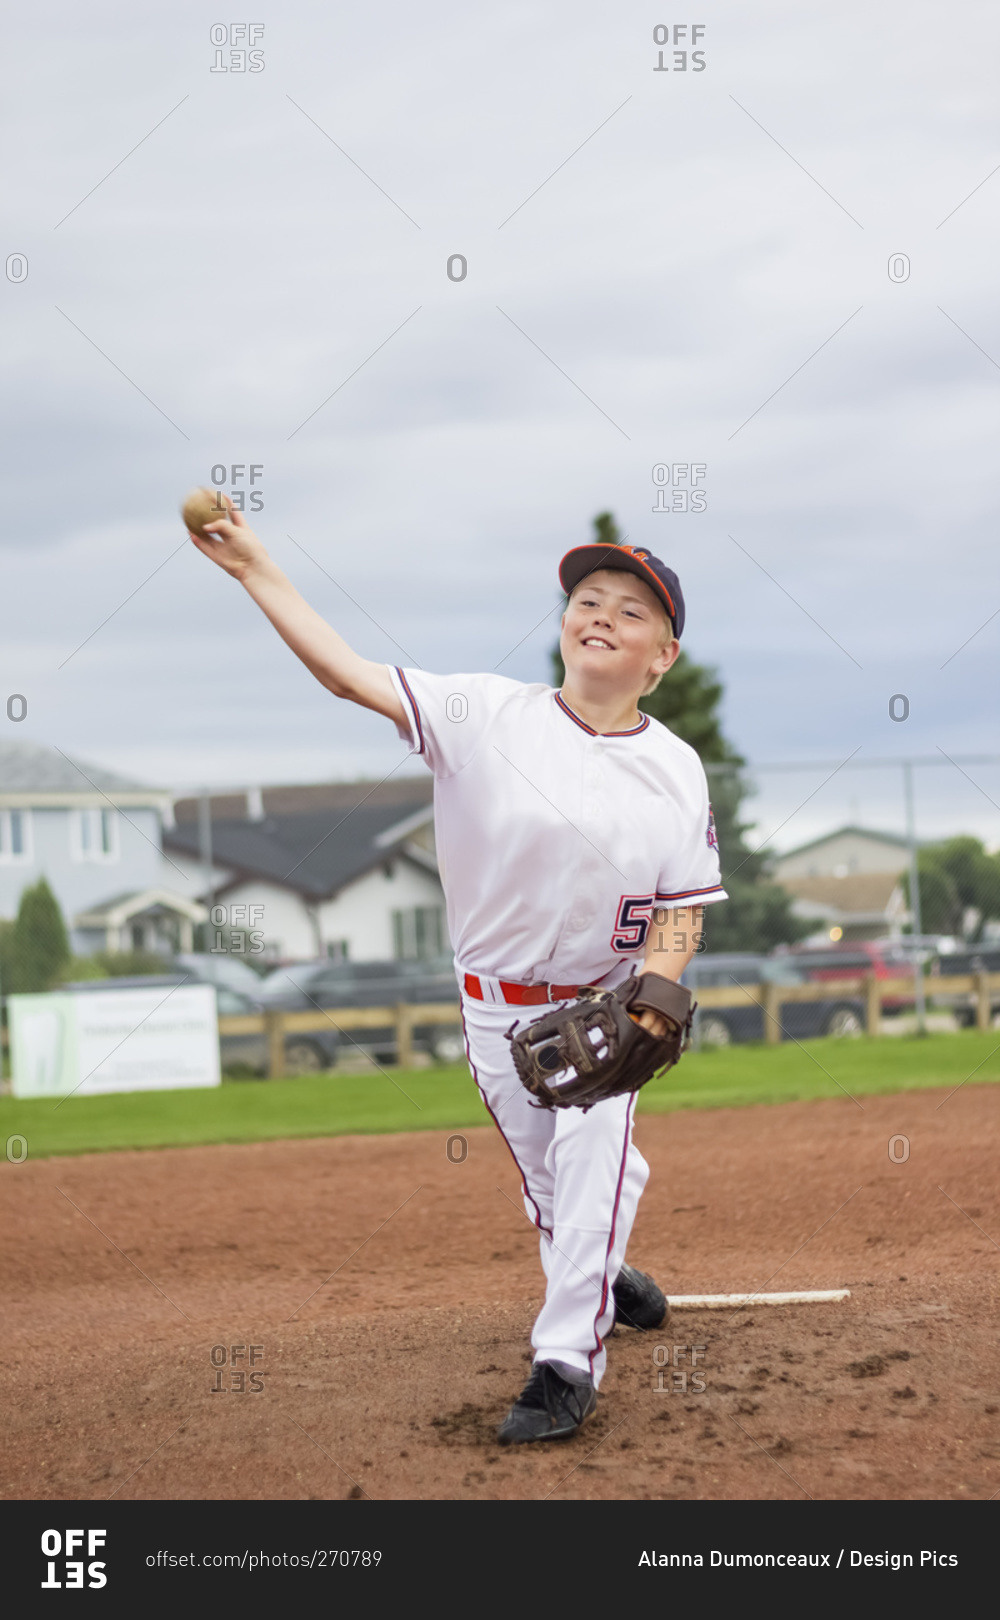 A young boy pitches the baseball from the pitchers mound during a ball game in a white uniform with a baseball and glove, Fort McMurray, Alberta, Canada